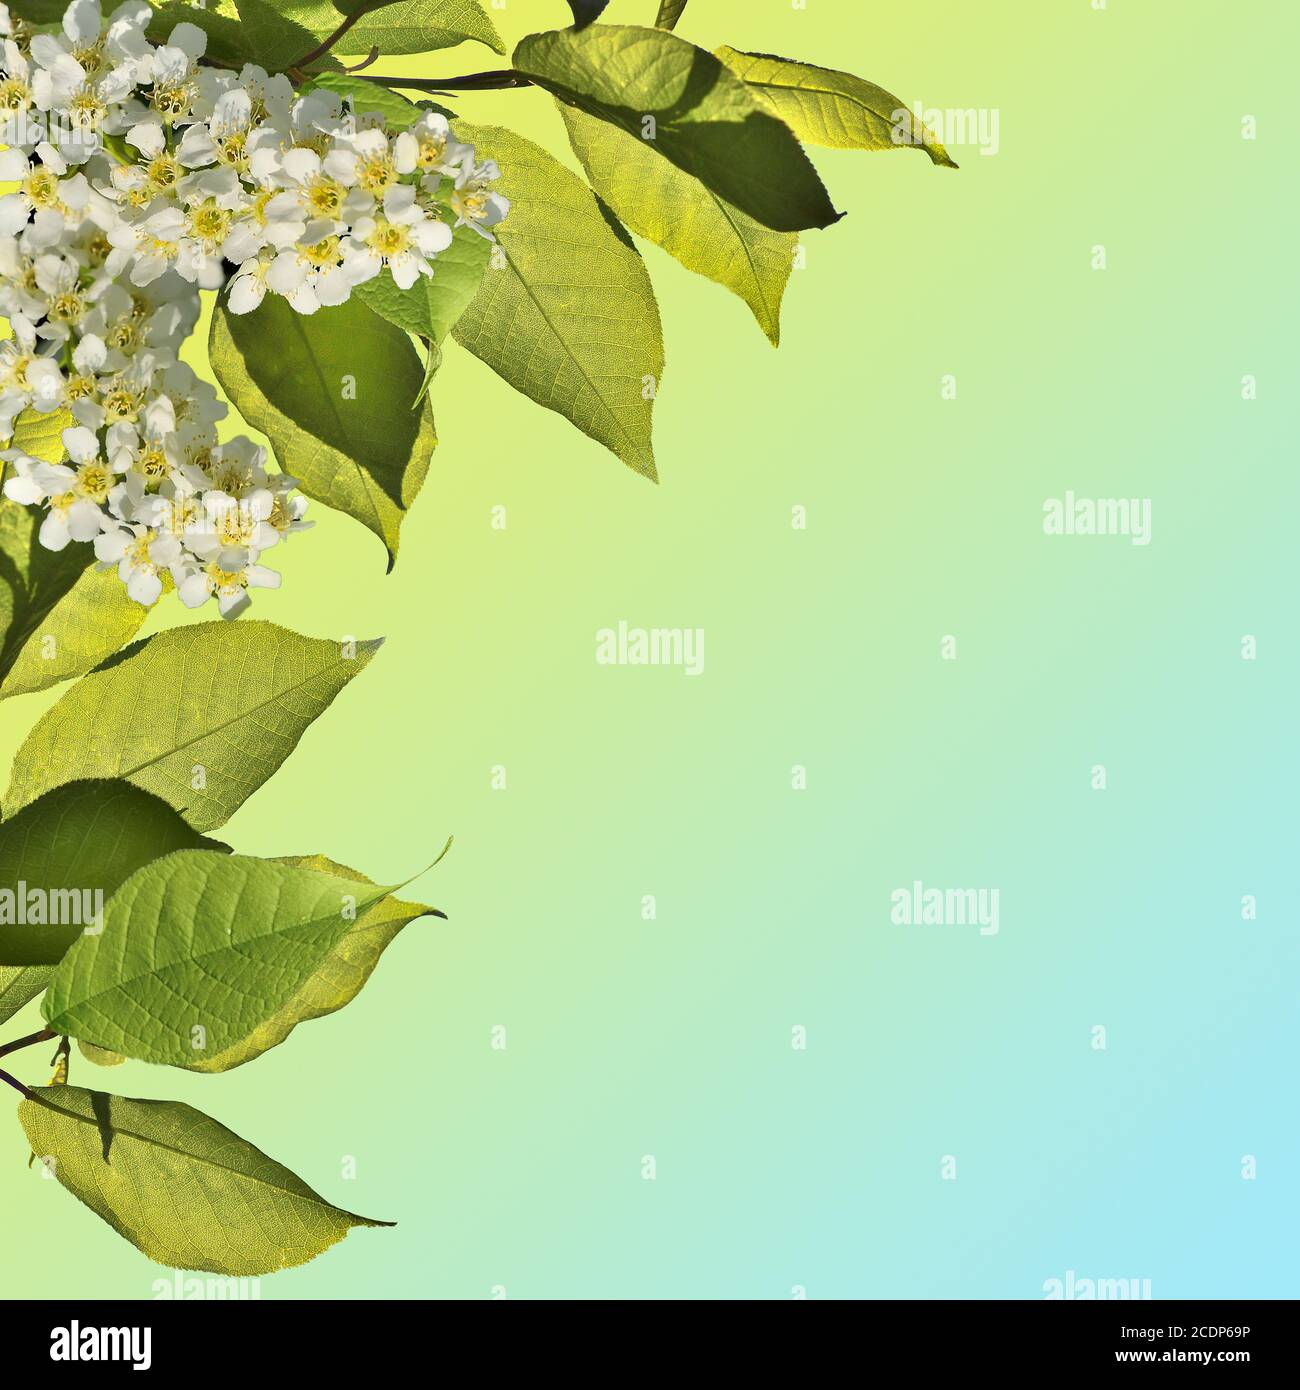 Spring blossoming background - abstract floral border of green leaves and white flowers. Stock Photo